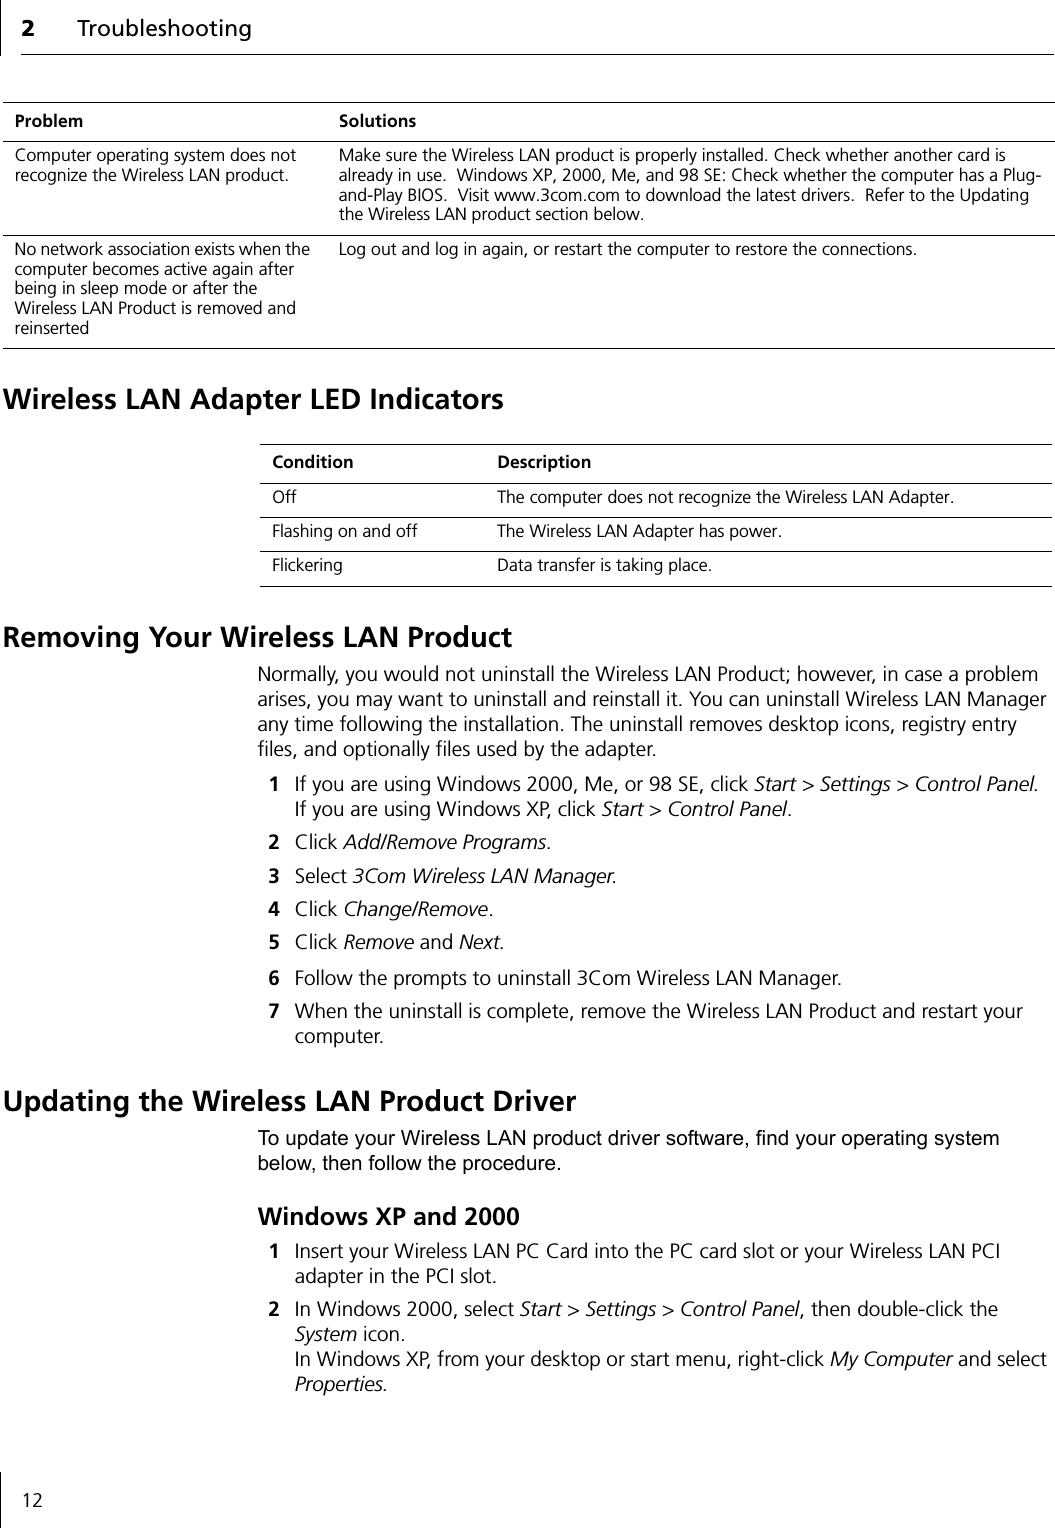 2Troubleshooting12Wireless LAN Adapter LED IndicatorsRemoving Your Wireless LAN ProductNormally, you would not uninstall the Wireless LAN Product; however, in case a problem arises, you may want to uninstall and reinstall it. You can uninstall Wireless LAN Manager any time following the installation. The uninstall removes desktop icons, registry entry files, and optionally files used by the adapter.1If you are using Windows 2000, Me, or 98 SE, click Start &gt; Settings &gt; Control Panel.  If you are using Windows XP, click Start &gt; Control Panel.2Click Add/Remove Programs.3Select 3Com Wireless LAN Manager.4Click Change/Remove.5Click Remove and Next.6Follow the prompts to uninstall 3Com Wireless LAN Manager.7When the uninstall is complete, remove the Wireless LAN Product and restart your computer.Updating the Wireless LAN Product DriverTo update your Wireless LAN product driver software, find your operating system below, then follow the procedure.Windows XP and 20001Insert your Wireless LAN PC Card into the PC card slot or your Wireless LAN PCI adapter in the PCI slot.2In Windows 2000, select Start &gt; Settings &gt; Control Panel, then double-click the System icon. In Windows XP, from your desktop or start menu, right-click My Computer and select Properties.Computer operating system does not recognize the Wireless LAN product.Make sure the Wireless LAN product is properly installed. Check whether another card is already in use.  Windows XP, 2000, Me, and 98 SE: Check whether the computer has a Plug-and-Play BIOS.  Visit www.3com.com to download the latest drivers.  Refer to the Updating the Wireless LAN product section below.No network association exists when the computer becomes active again after being in sleep mode or after the Wireless LAN Product is removed and reinsertedLog out and log in again, or restart the computer to restore the connections.Problem SolutionsCondition DescriptionOff The computer does not recognize the Wireless LAN Adapter.Flashing on and off The Wireless LAN Adapter has power. Flickering Data transfer is taking place.